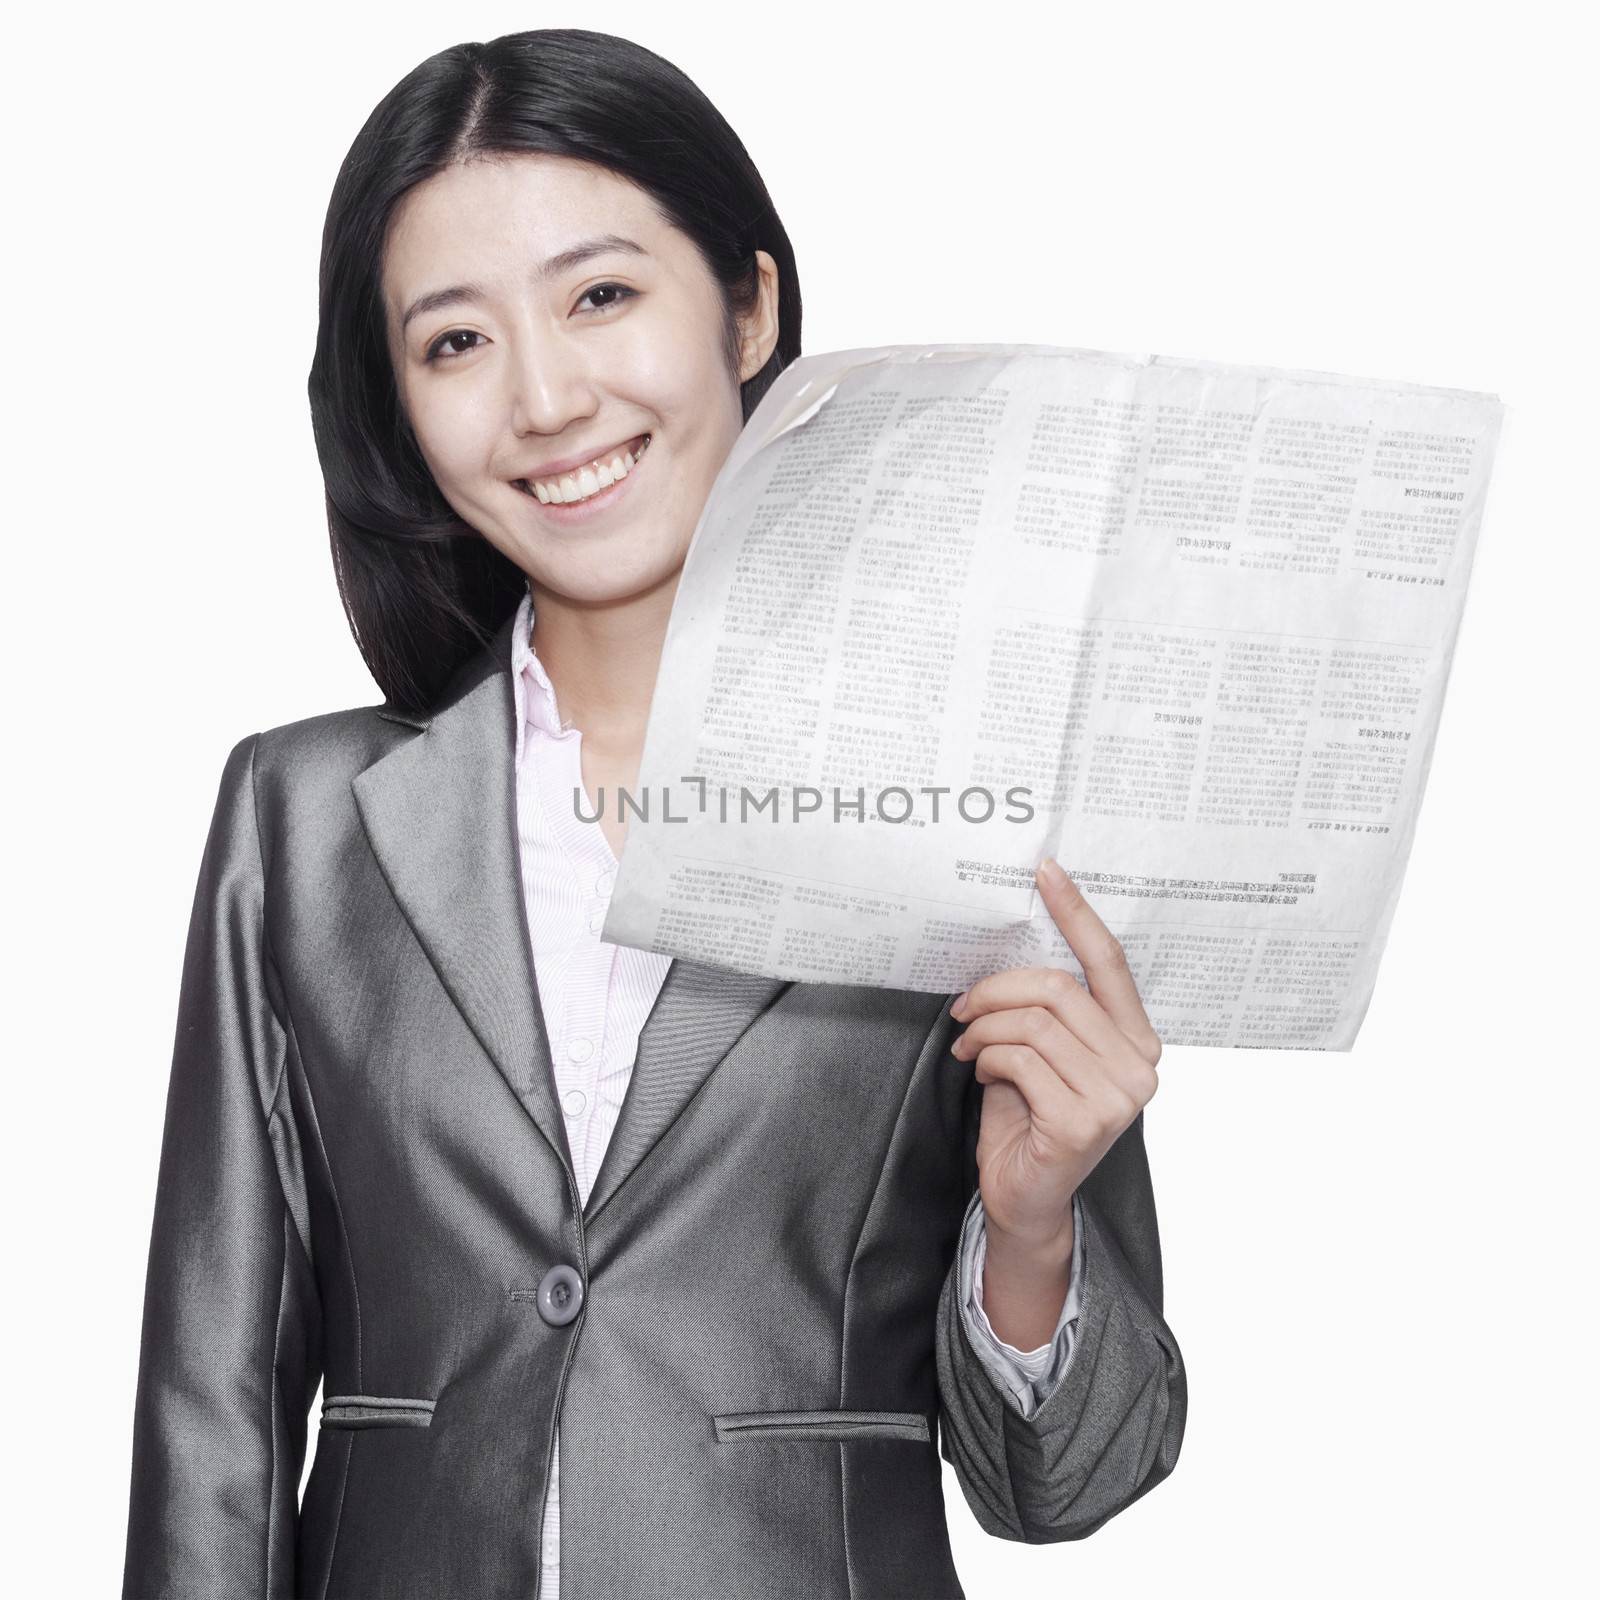 Businesswoman standing with newspaper